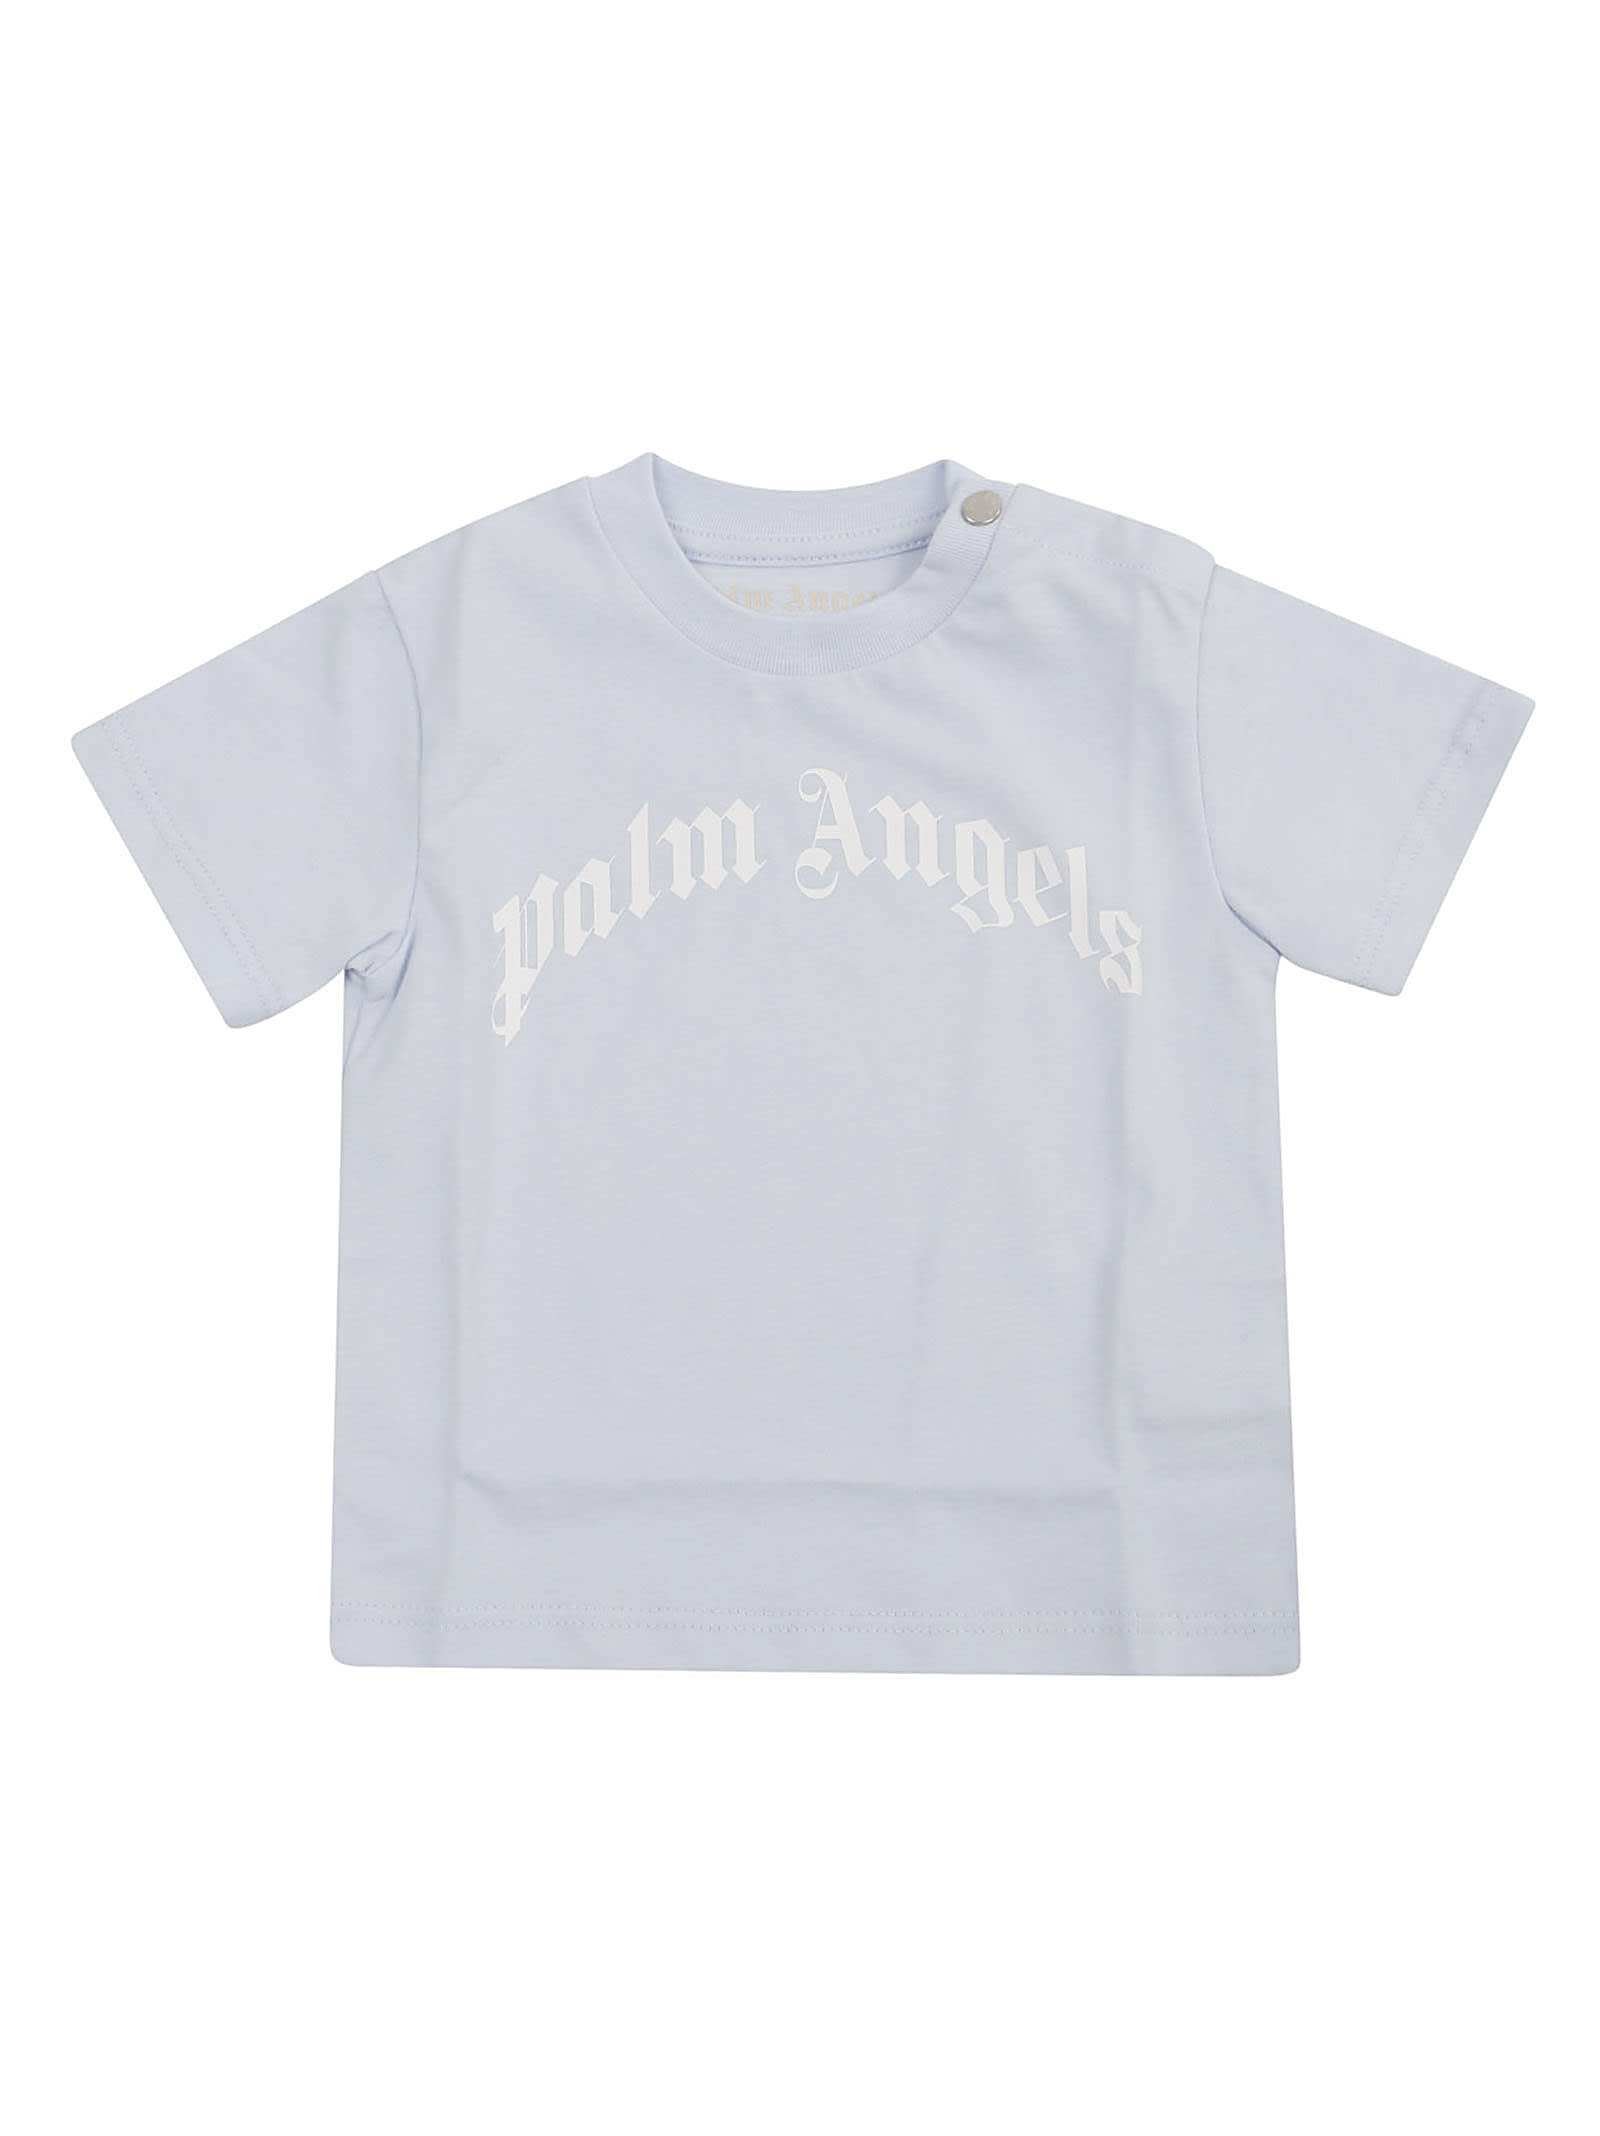 Palm Angels Curved Logo T-shirt White Navy Blue